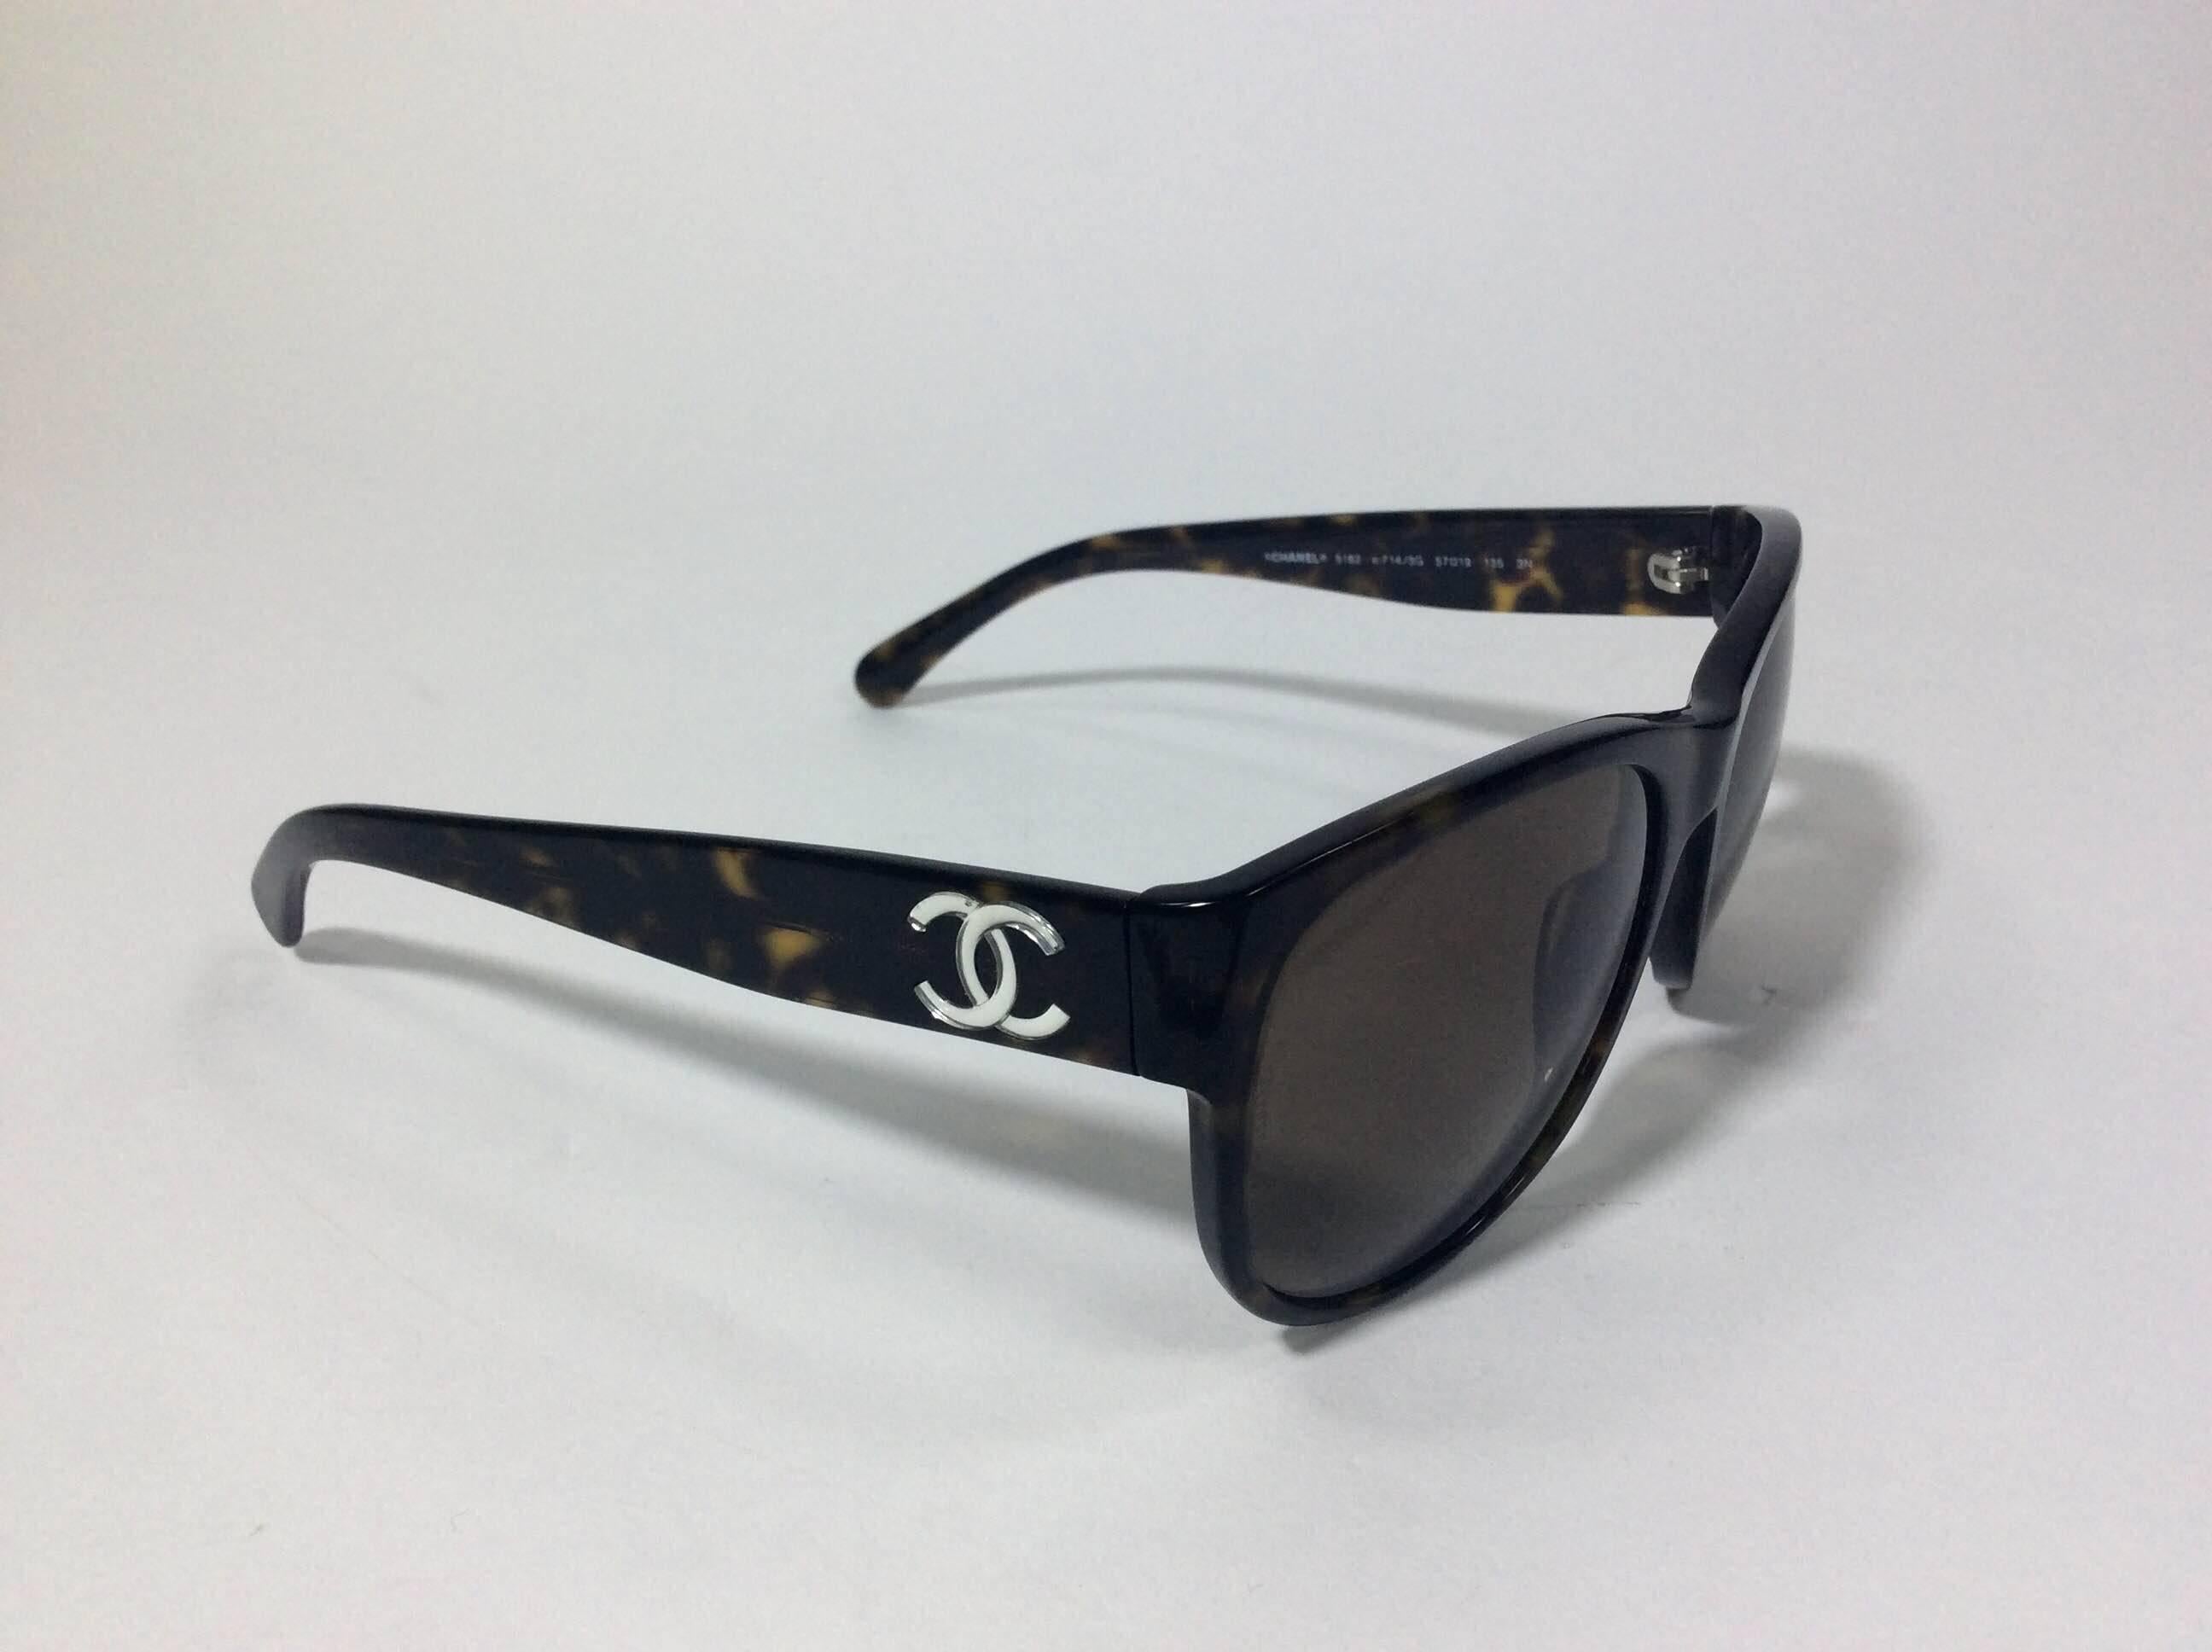 Chanel Black Tortoise Sunglass In Excellent Condition For Sale In Narberth, PA